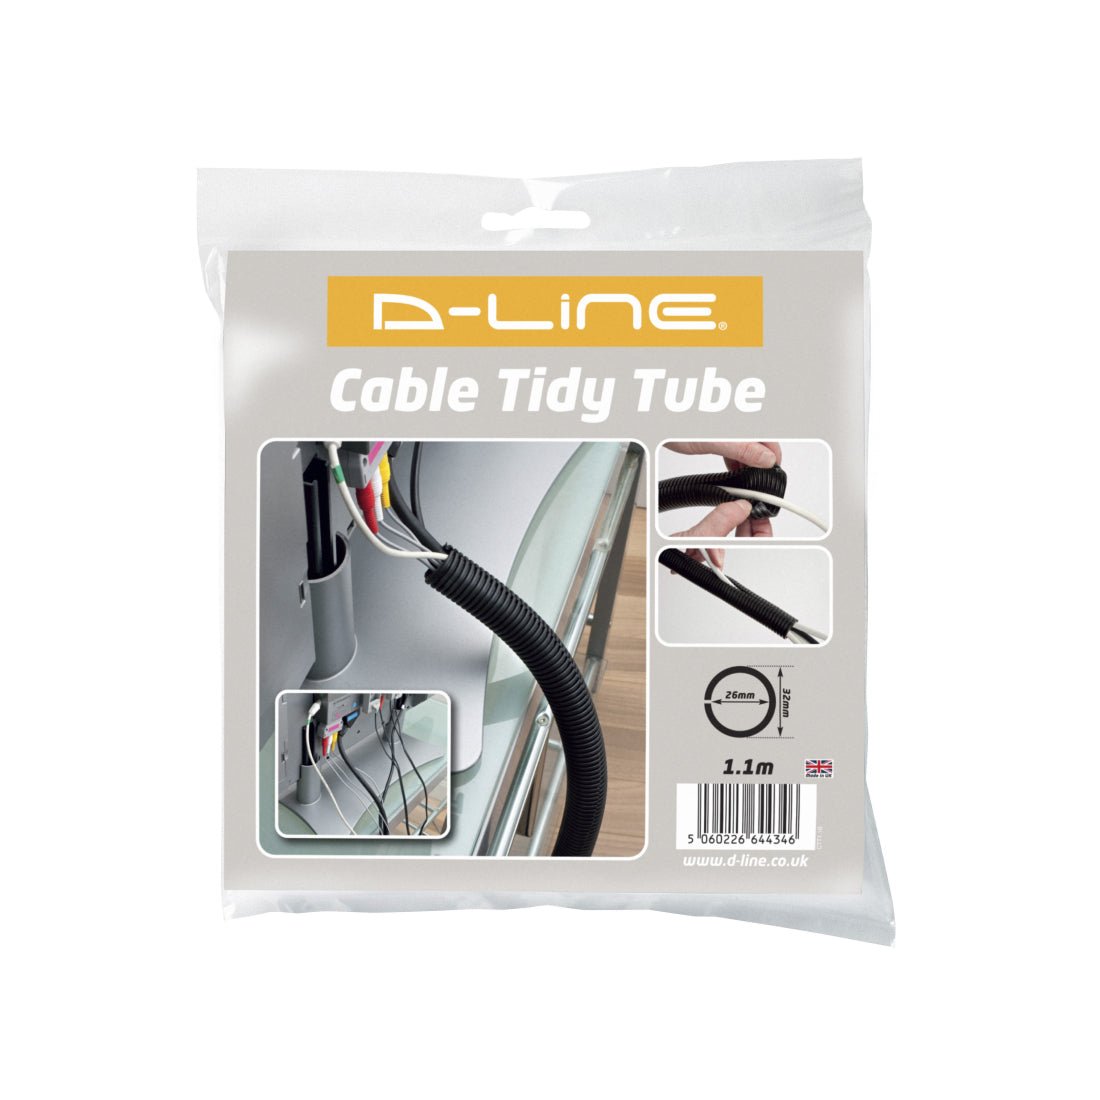 D-Line Cable Tidy Tube 1.1m x 32mm - Black - Store 974 | ستور ٩٧٤